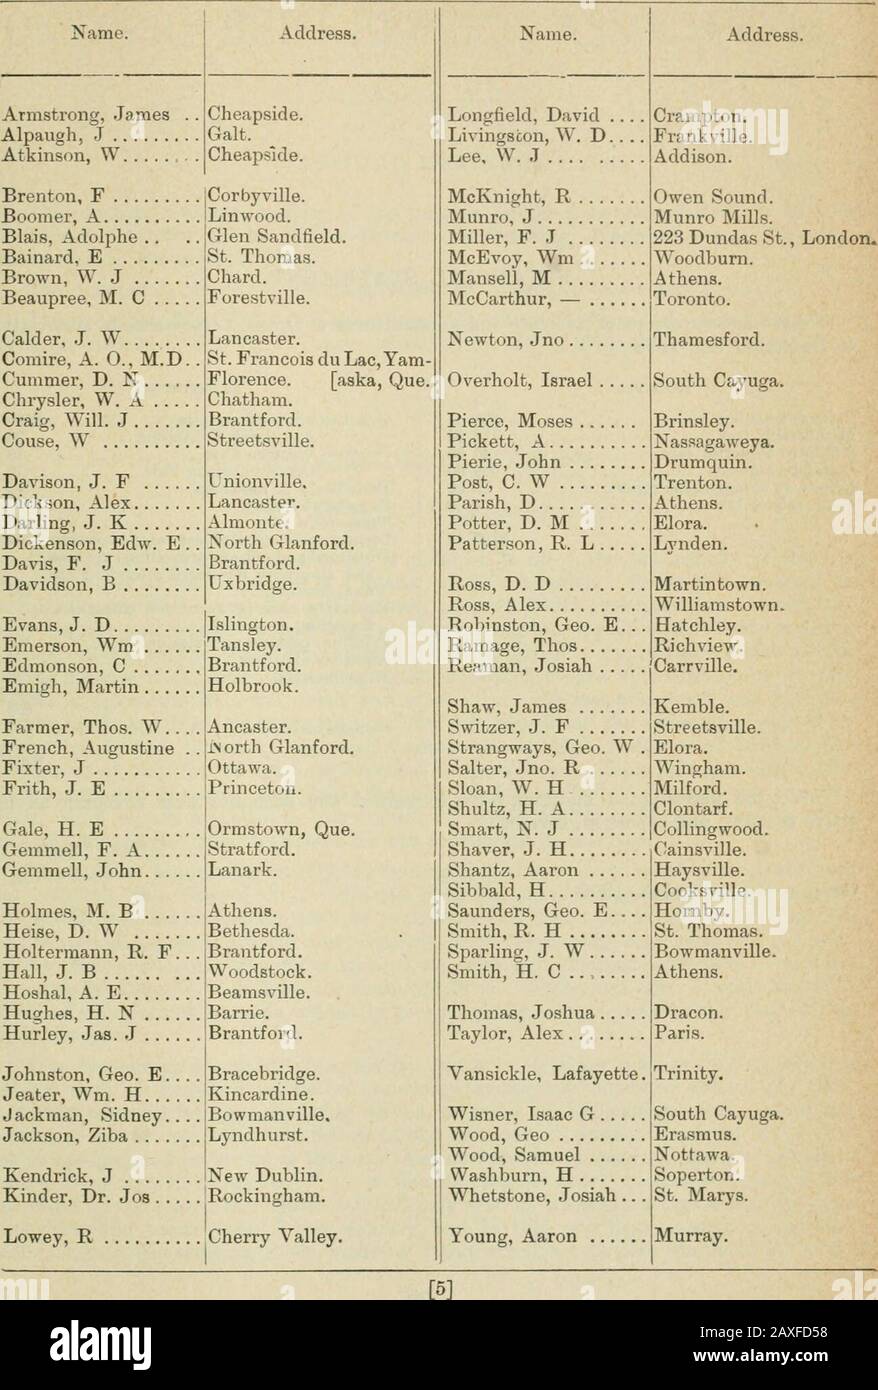 Ontario Sessional Papers, 1898-99, No.18-25 . rling, Almonte. District No. 3, M. B. Holmes, Athens. District No. 4, - - - C. W. Post, Trenton. District No. 5, 3.W. Sparling, Bowmanville. District No. 6, D. W. Heise, Bethesda. District No. 7, A. Pickett, Nassagaweya. District No. 8, James Armstrong, Oheapside. District No. 9, - .... John Newton, Thamesford. District No. 10, - - - - . - - *• A. Gemmell, Stratford. DistrictNo.il, ------ - W. A. Chrysler, Chatham. District No. 12, - - . - - - H. N. Hughes, Barrie. Ontario Agricultural College, - - - - Dr. Jas. Mills, Guelph. fH. G. Sibbald, Cooksv Stock Photo